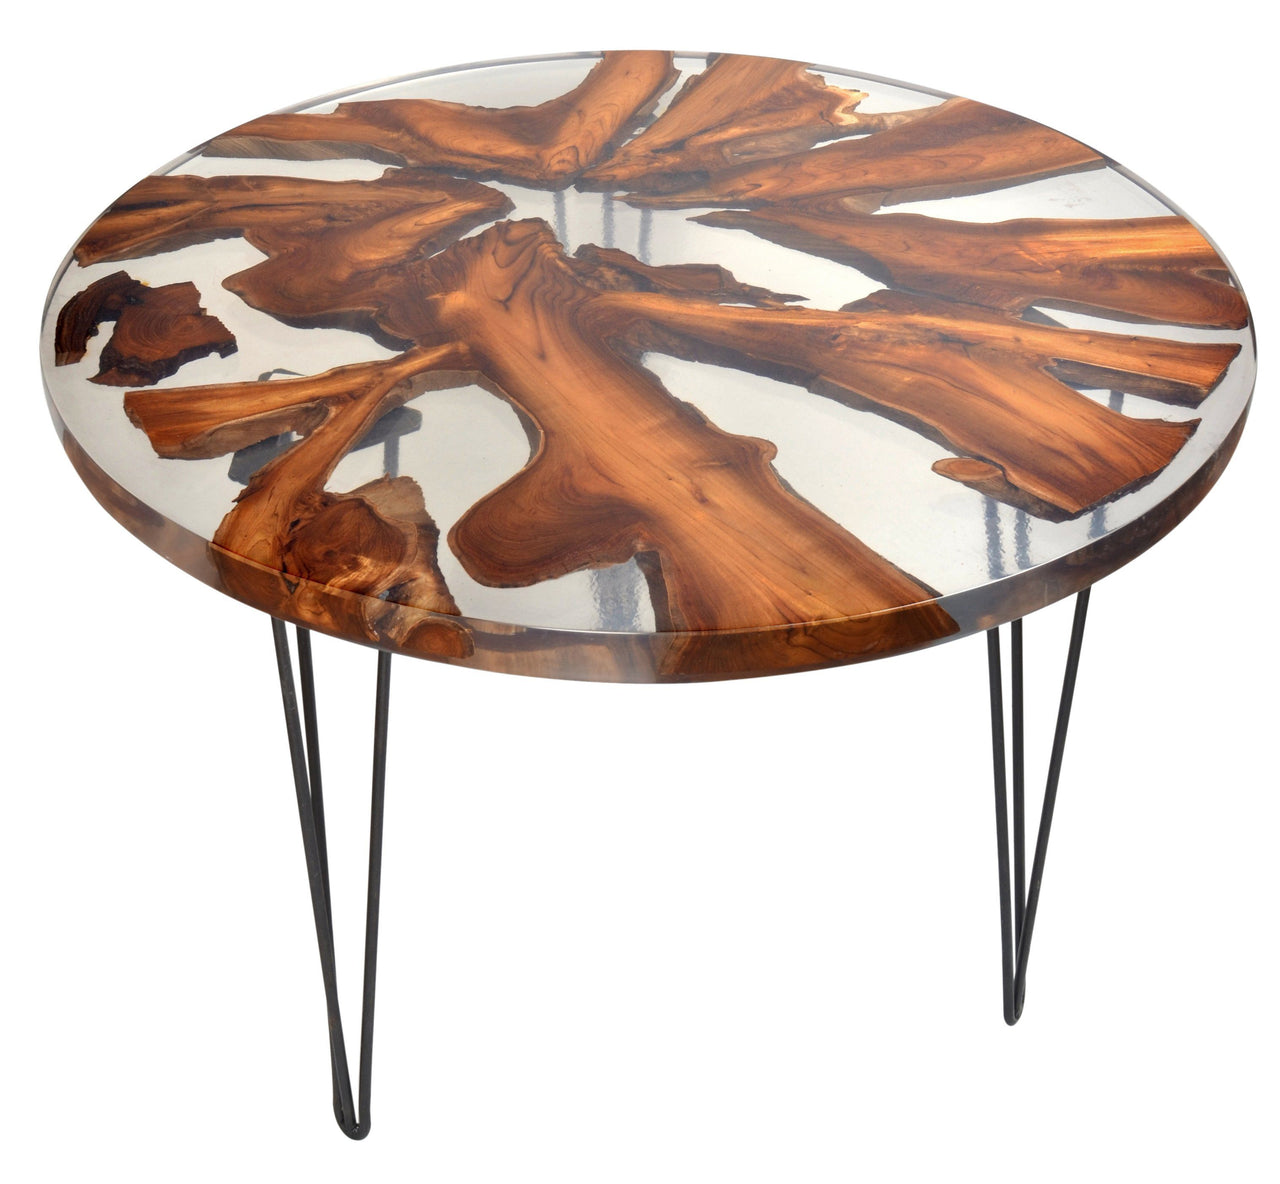 AFD Artistic Conjoined Floating Teak Acrylic Round Table 39 Inch Table With Iron Stand Tables AFD Brown, Clear and Black 